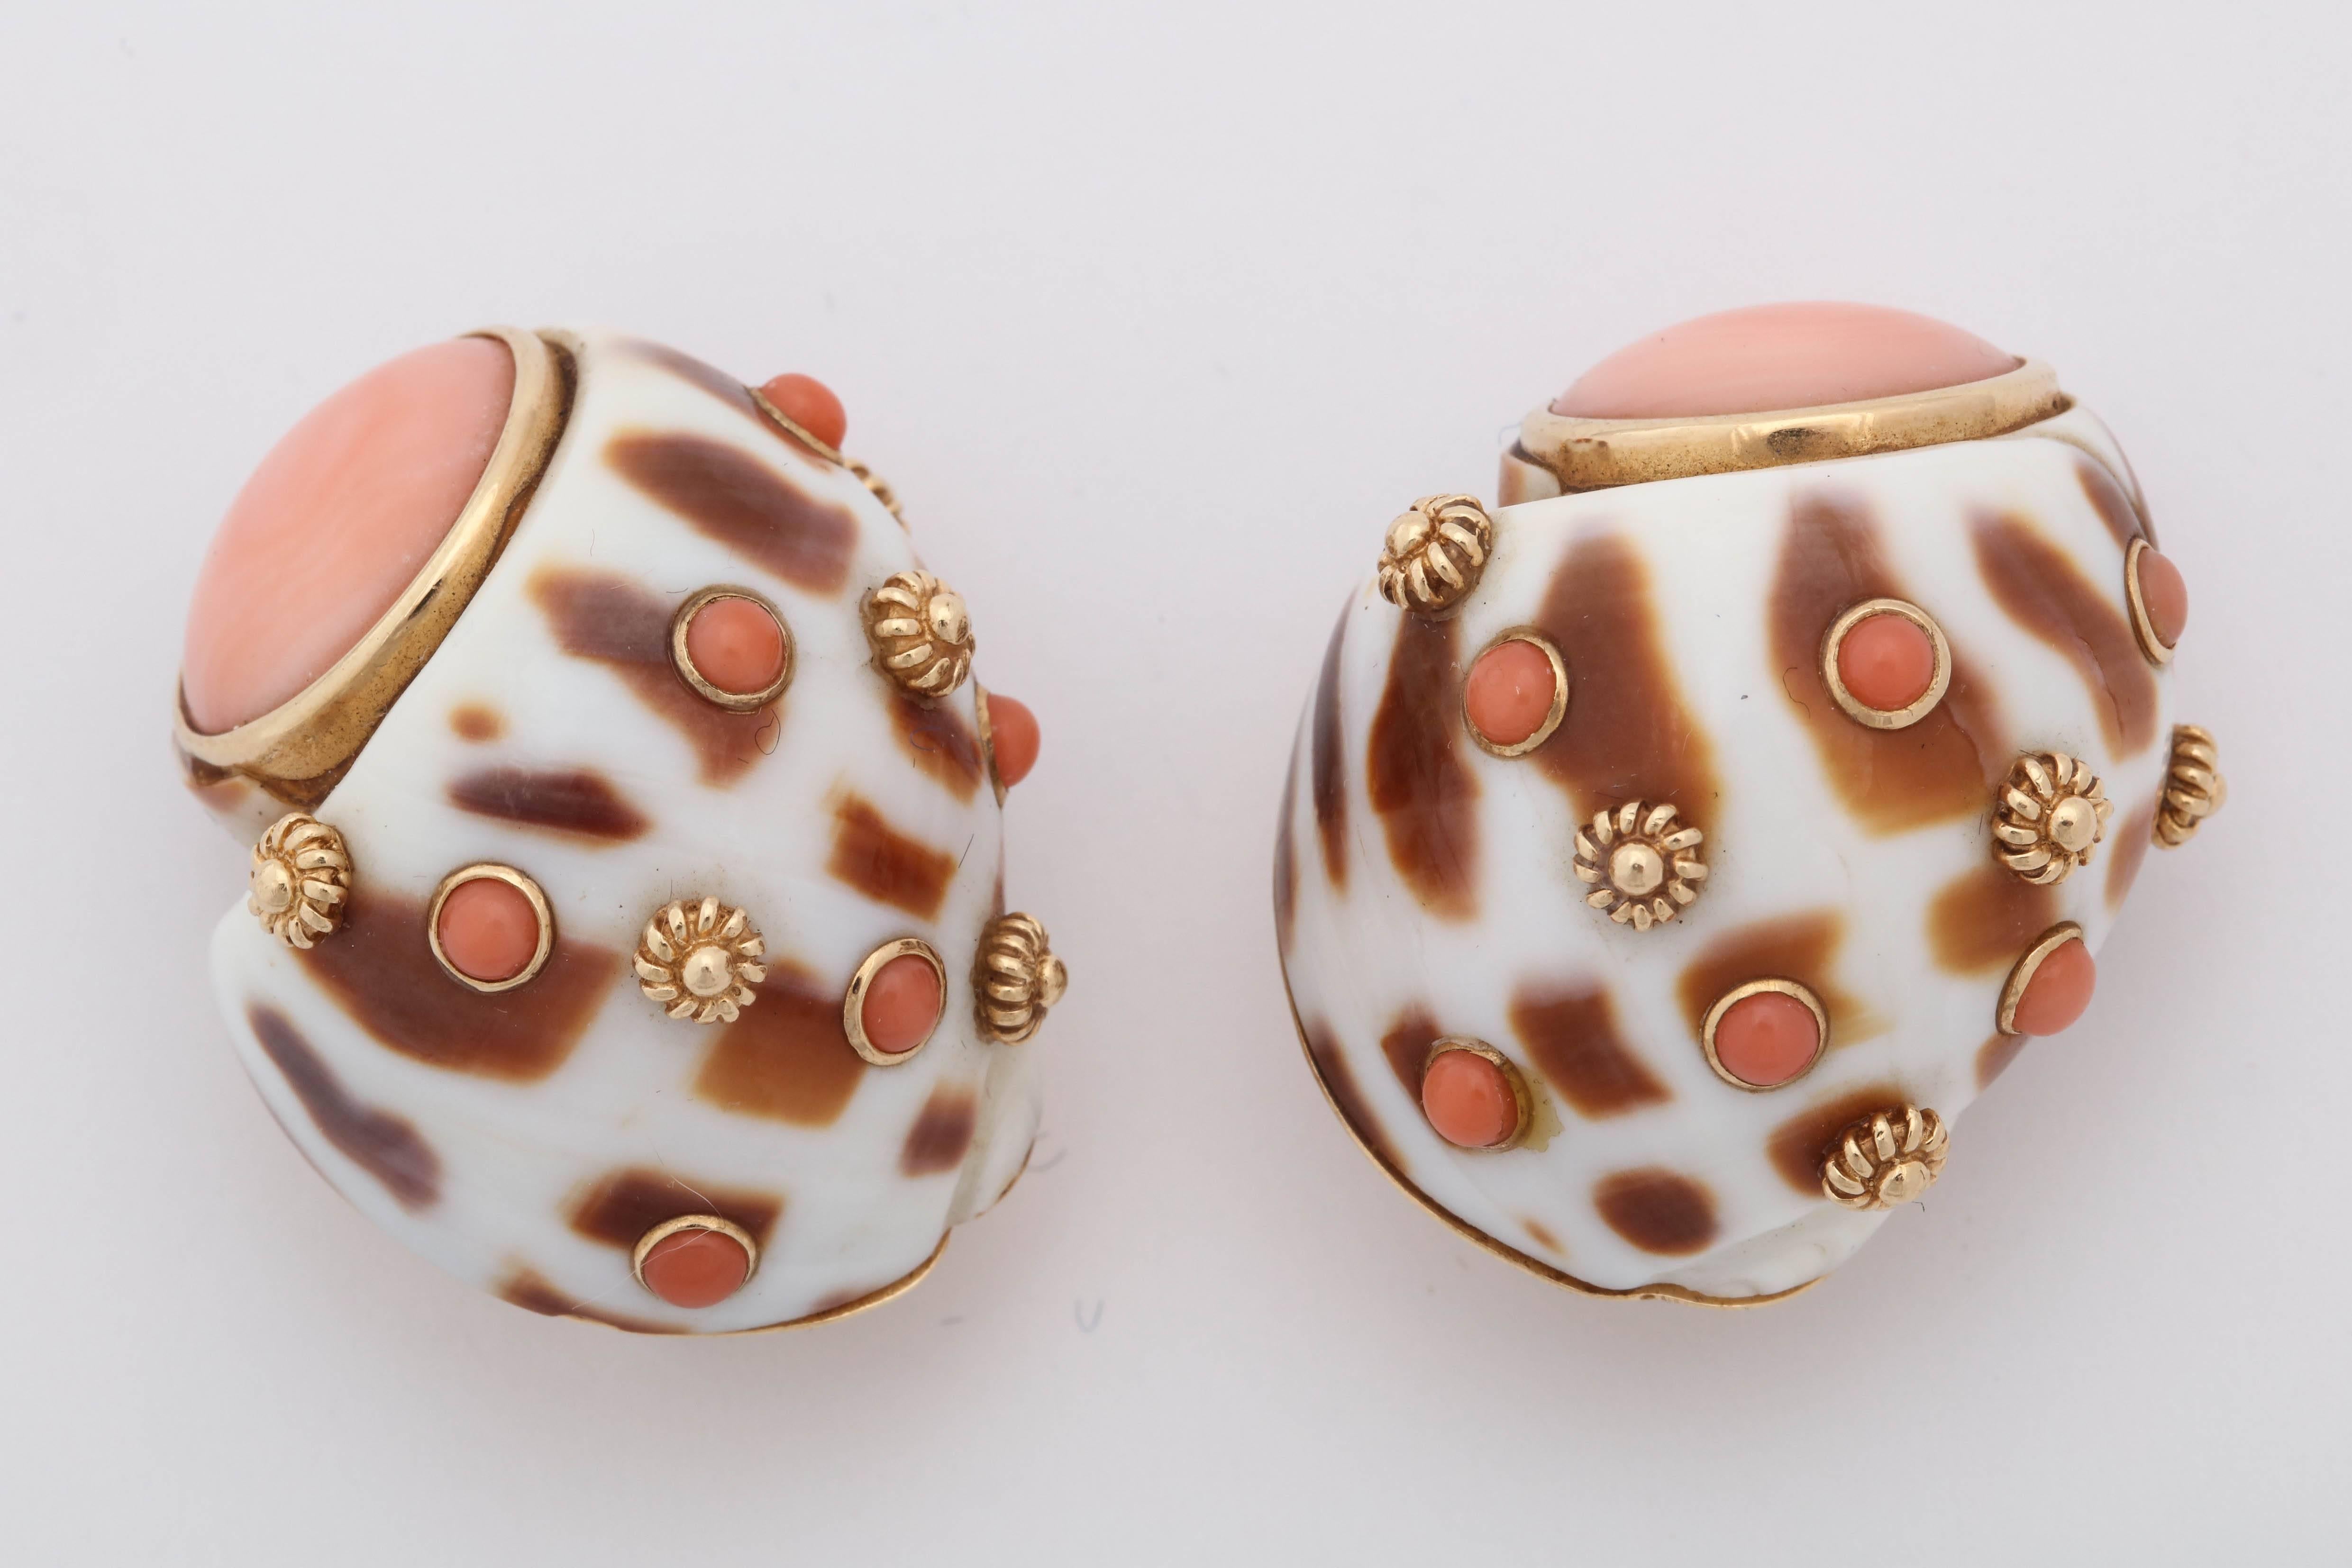 One Pair Of Ladies 14kt Yellow Gold Earclips Designed With An Animal Print Shell Motif. Earrings Are Further Embellished With Two Bezel Set Angel Skin Coral stones Measuring approximately 13MM Each Stone. These Great Earclips Are Further Created